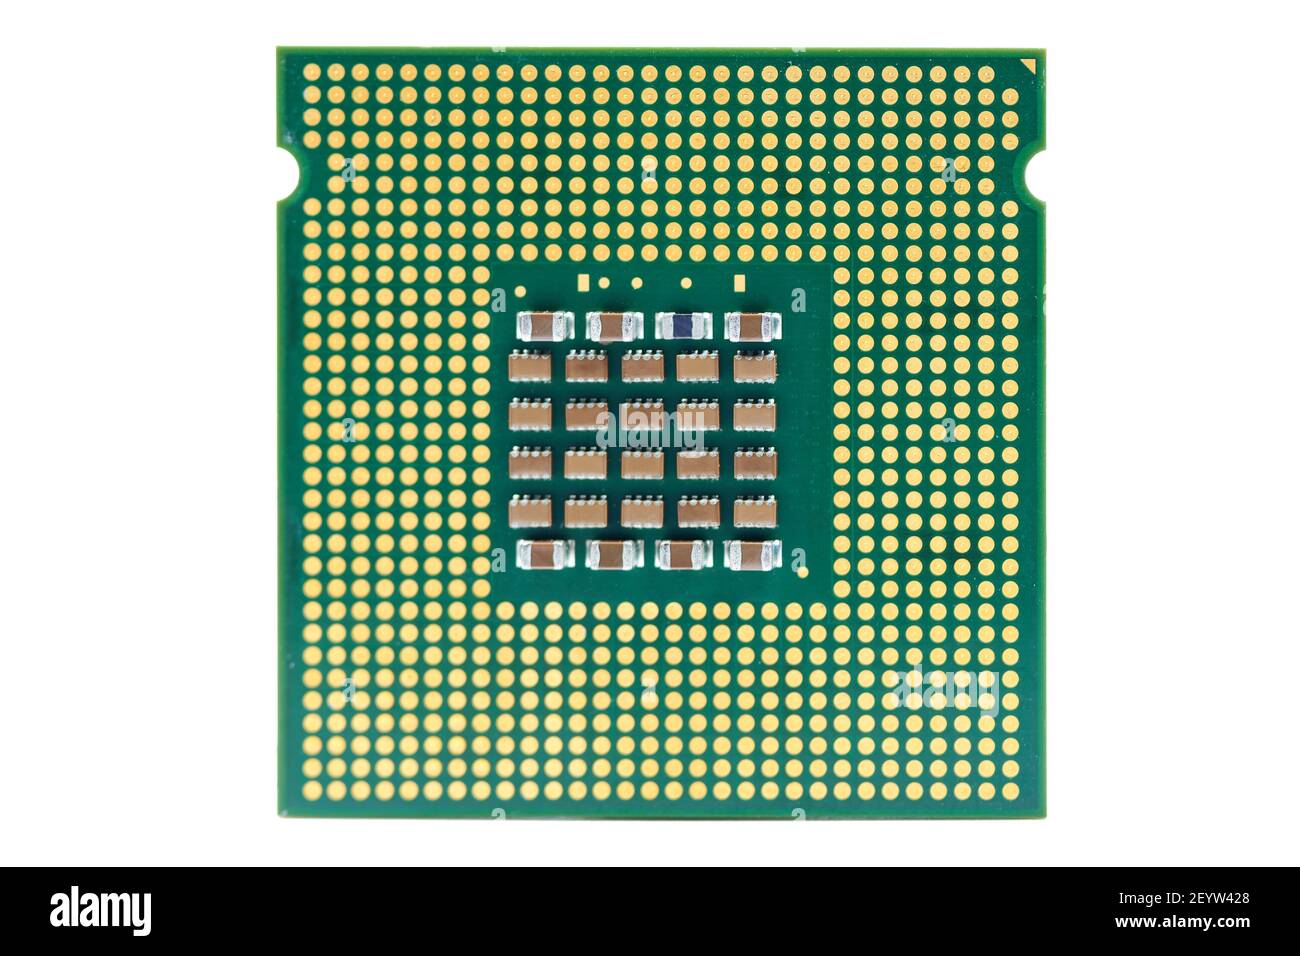 CPU, central processor unit, isolated background. Main electronic circuitry for computer. Stock Photo